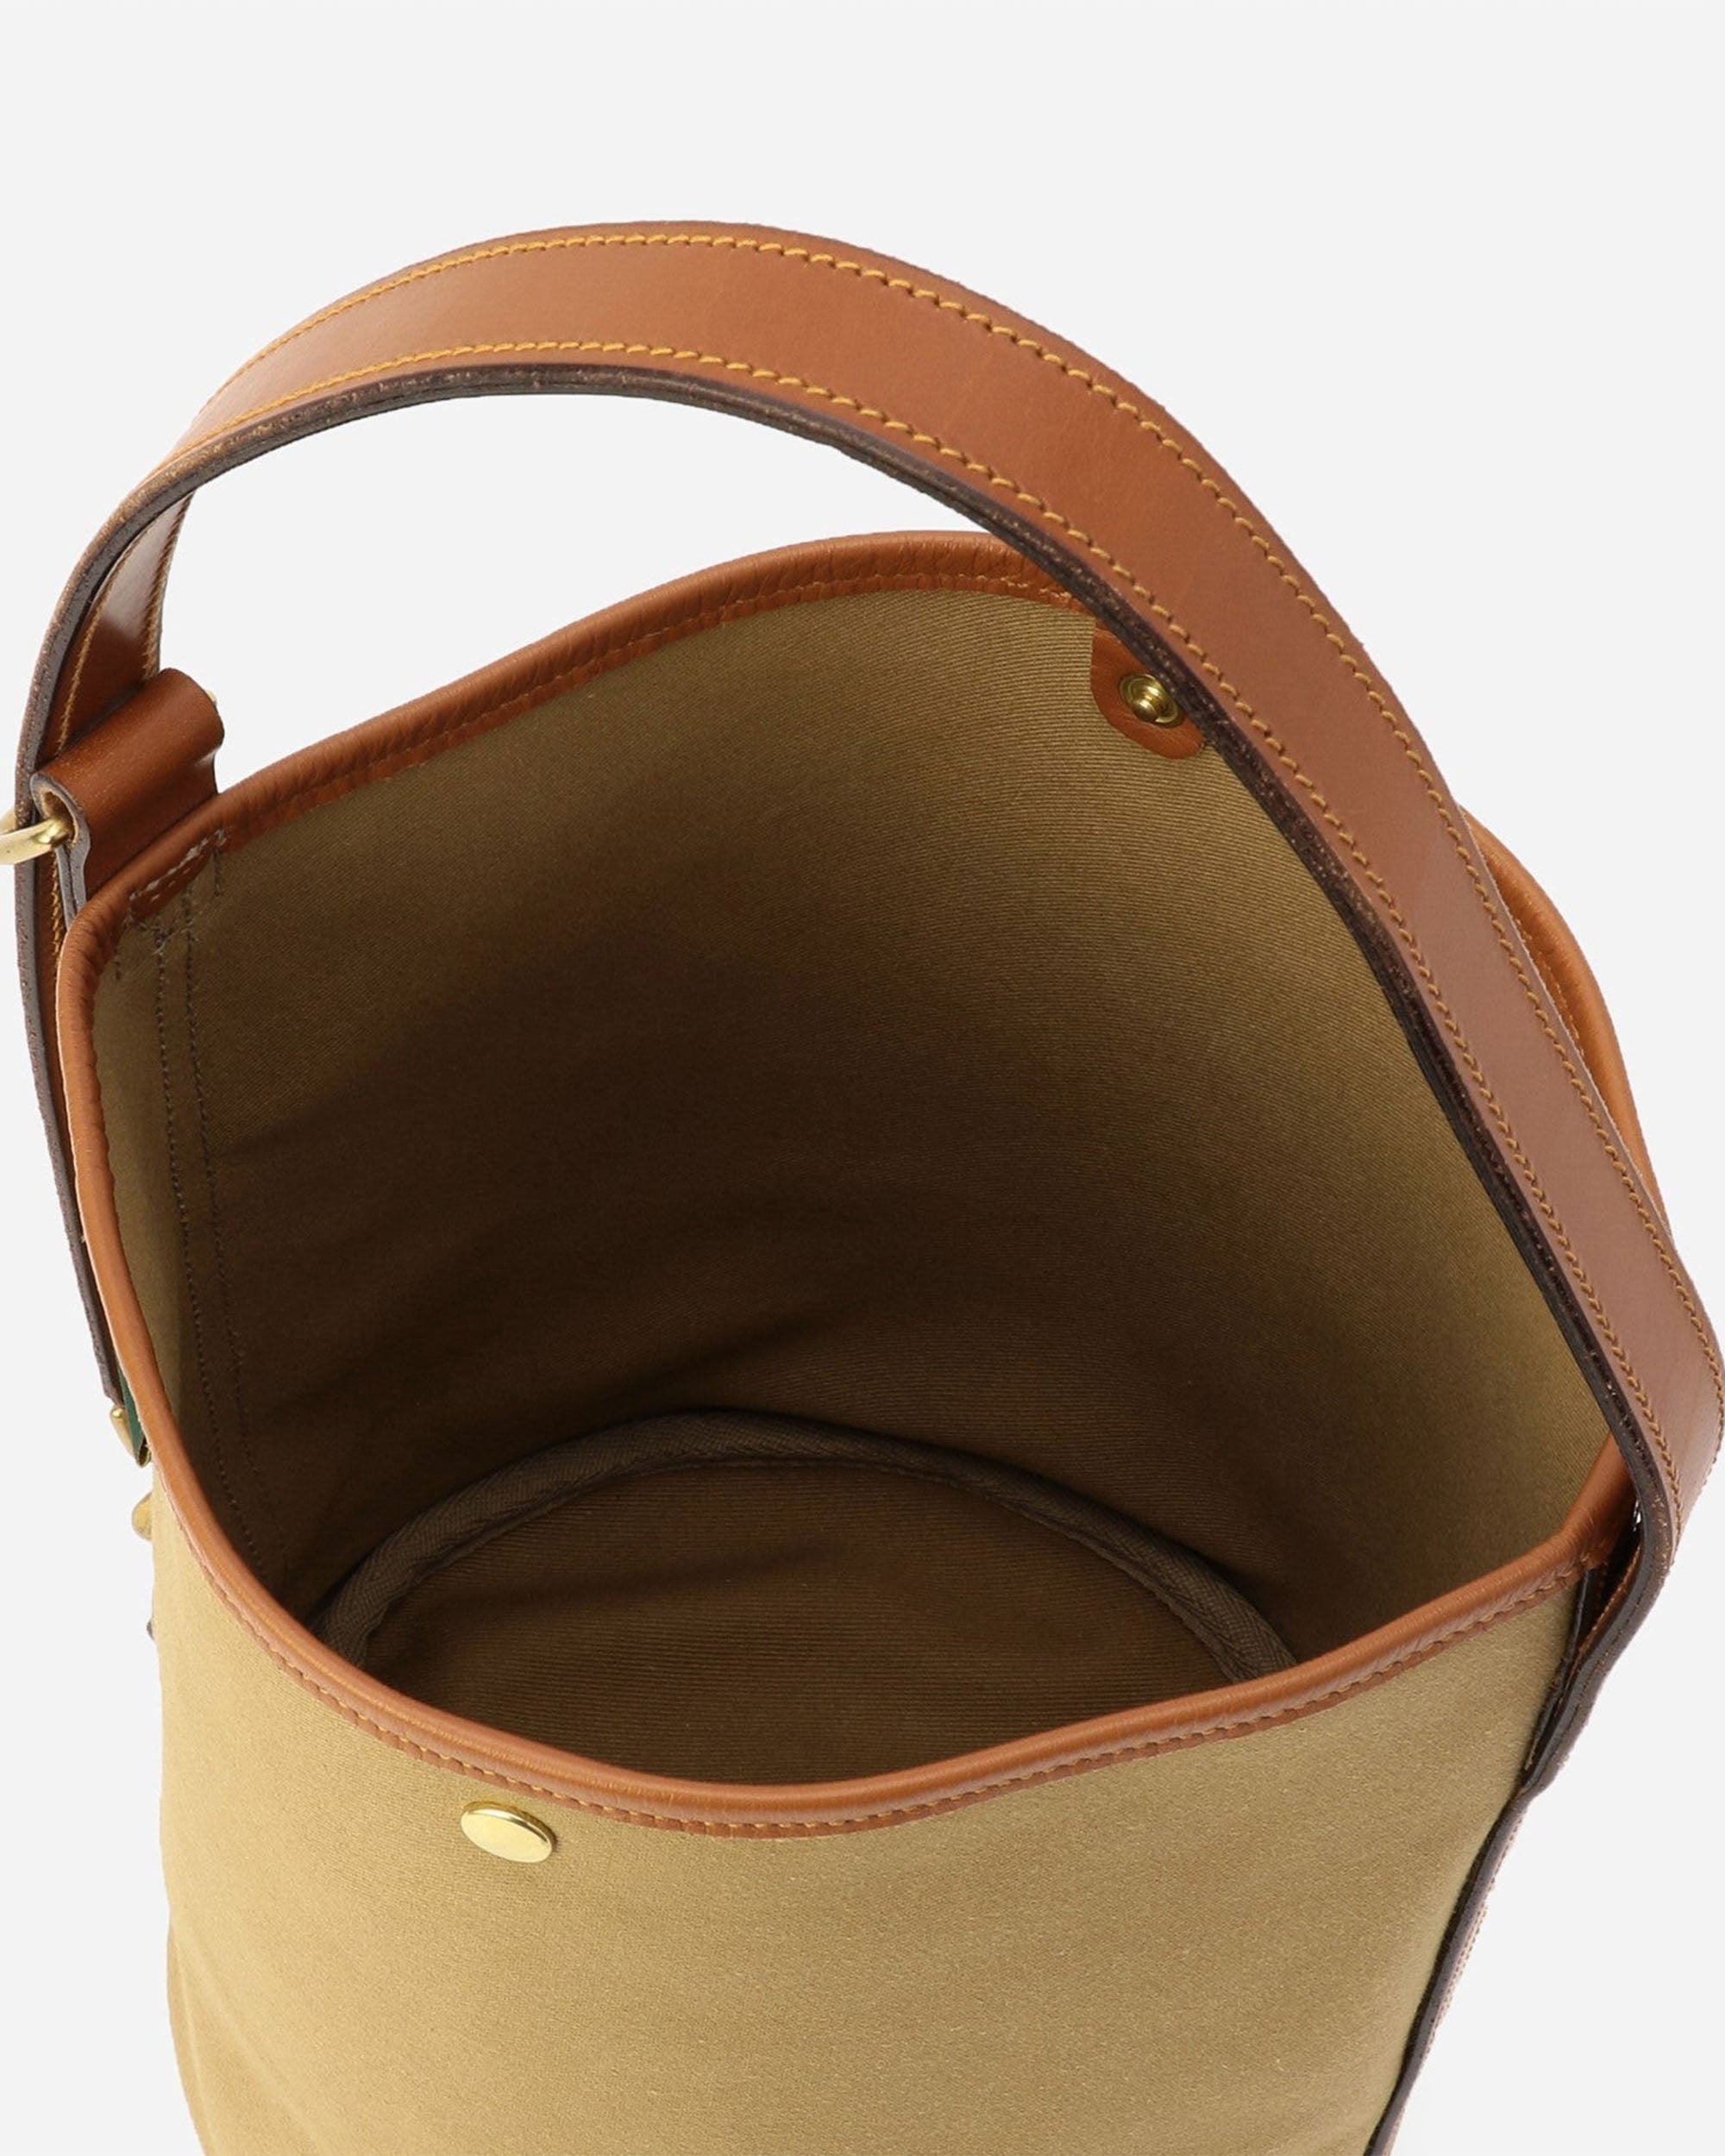 BRADY Frome Shoulder Bag in Canvas